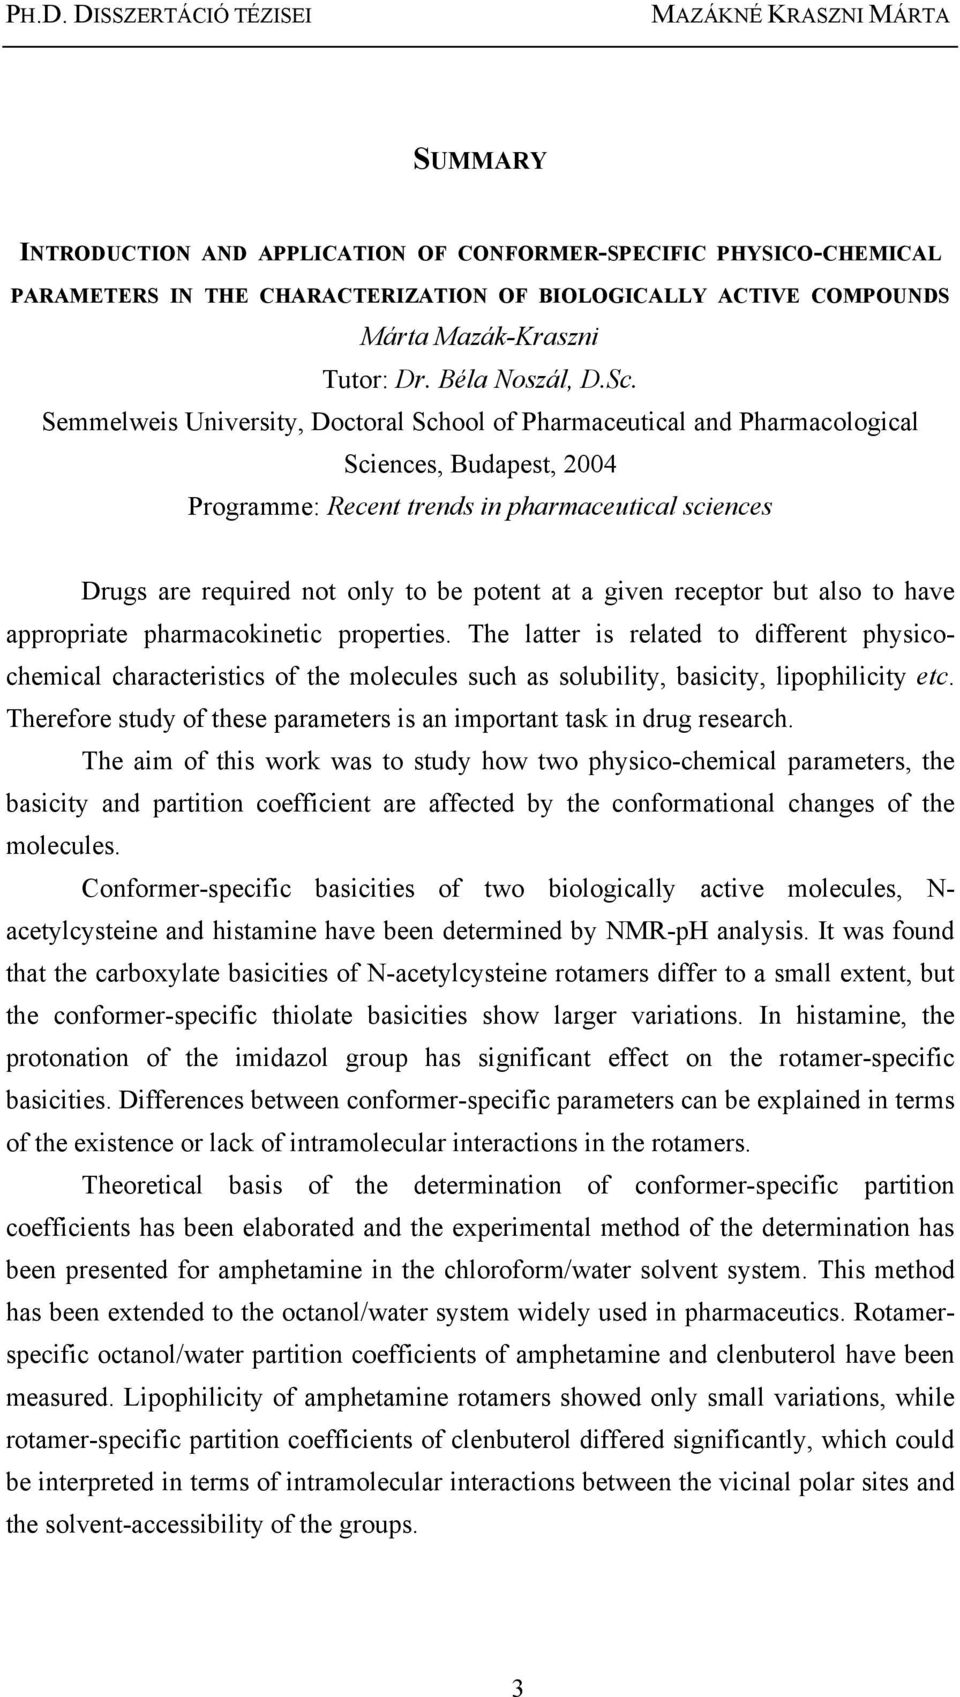 Semmelweis University, Doctoral School of Pharmaceutical and Pharmacological Sciences, Budapest, 2004 Programme: Recent trends in pharmaceutical sciences Drugs are required not only to be potent at a